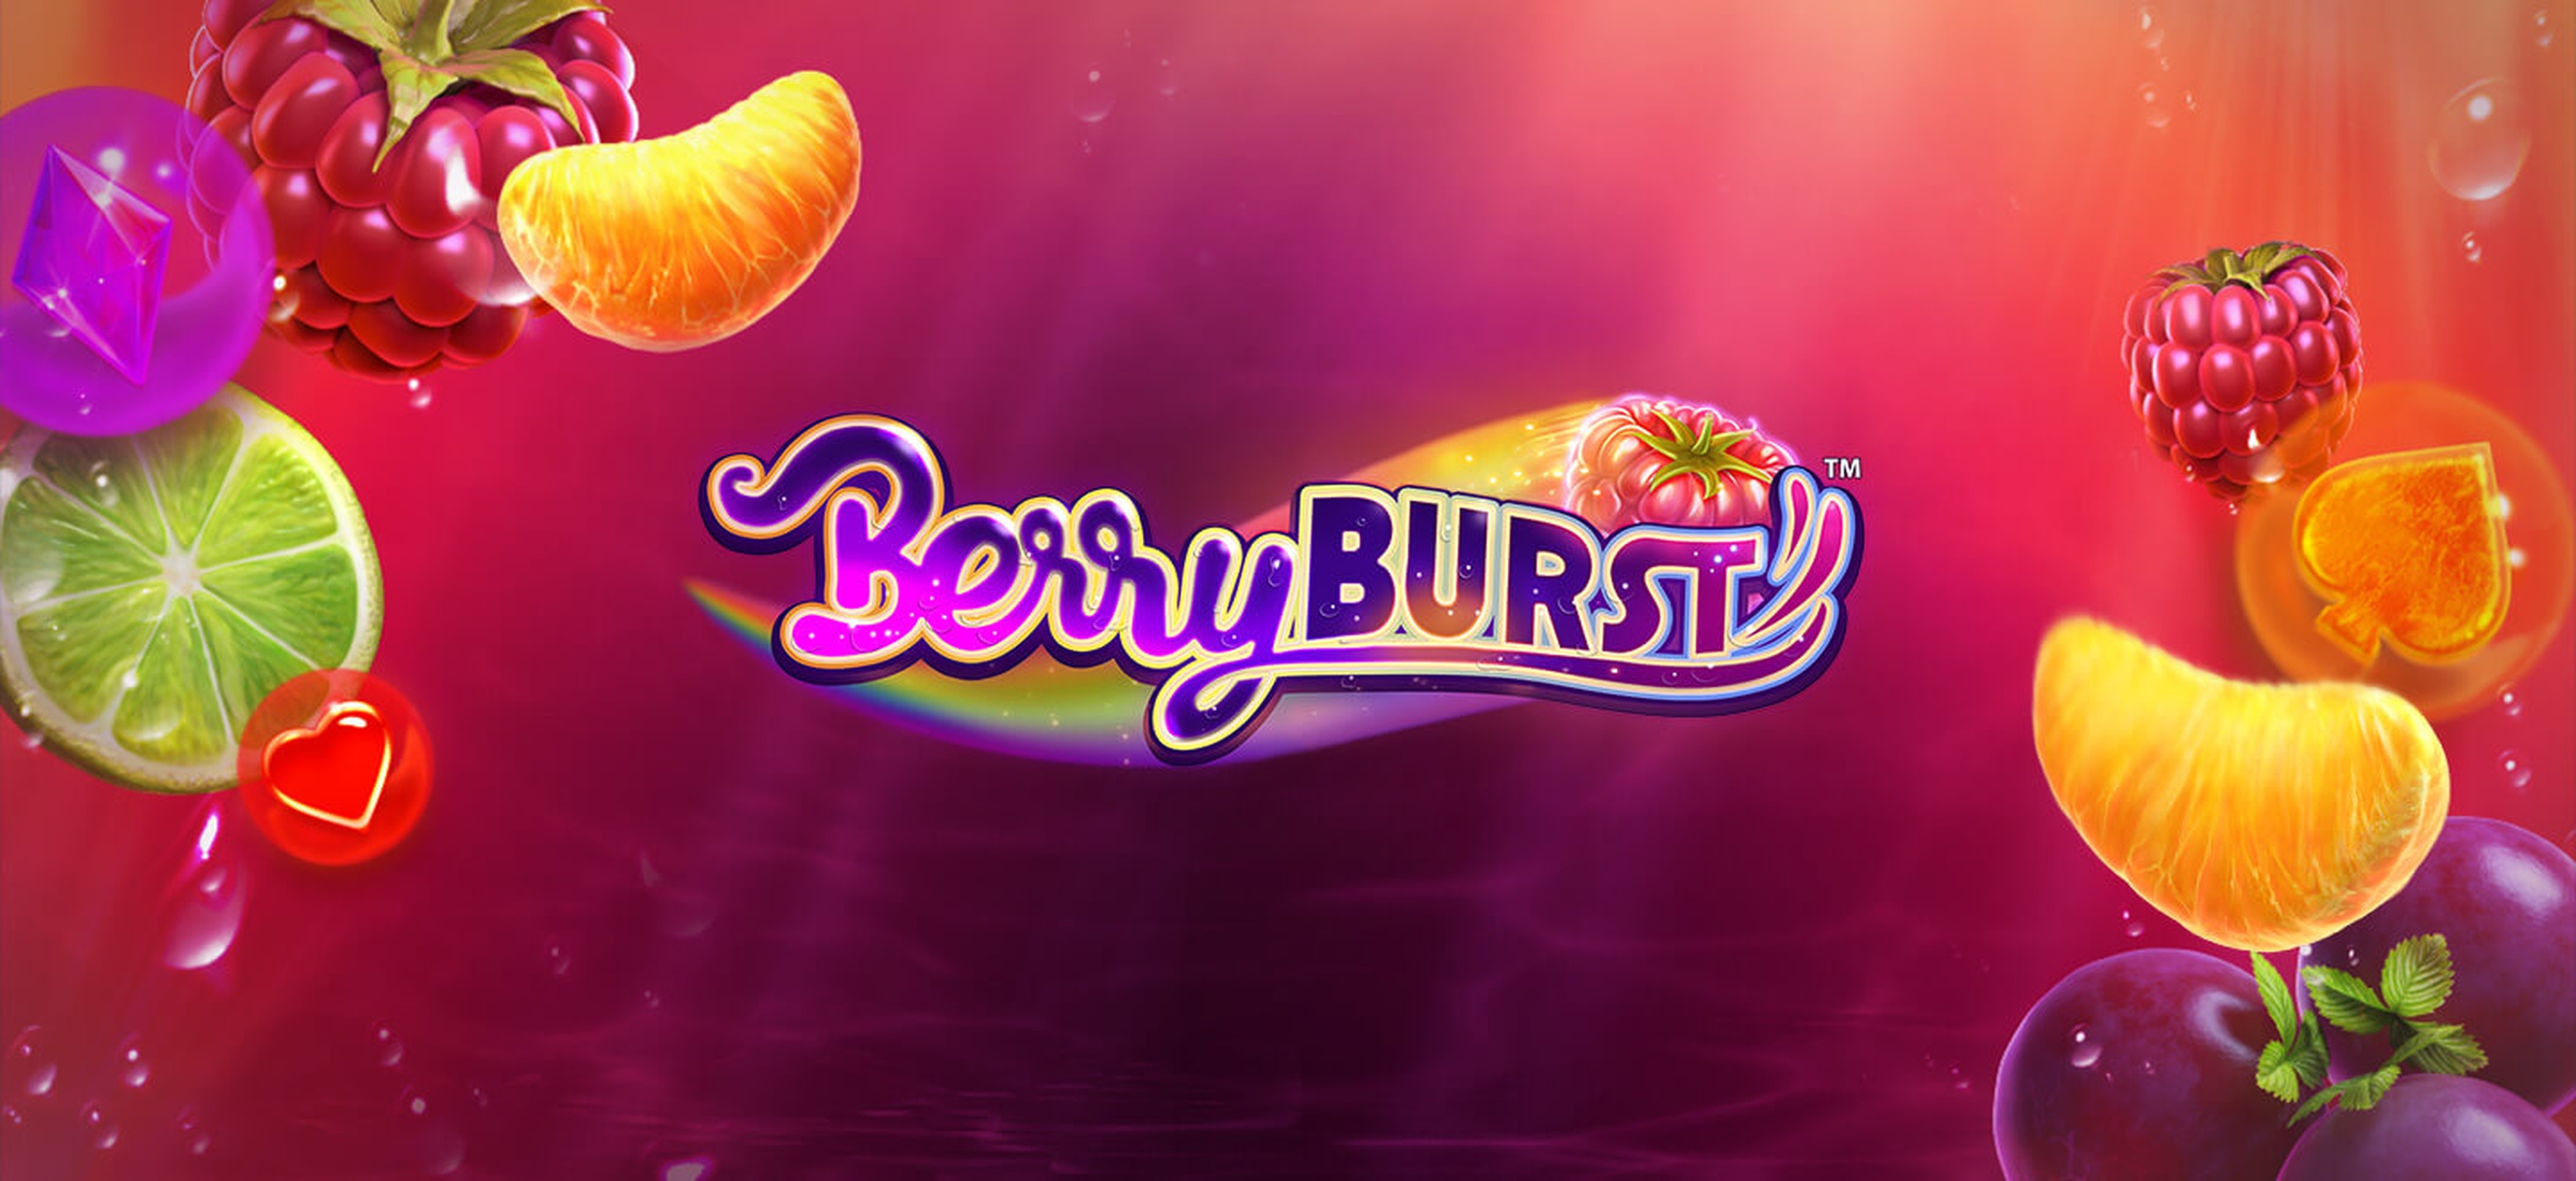 The Berryburst Online Slot Demo Game by NetEnt